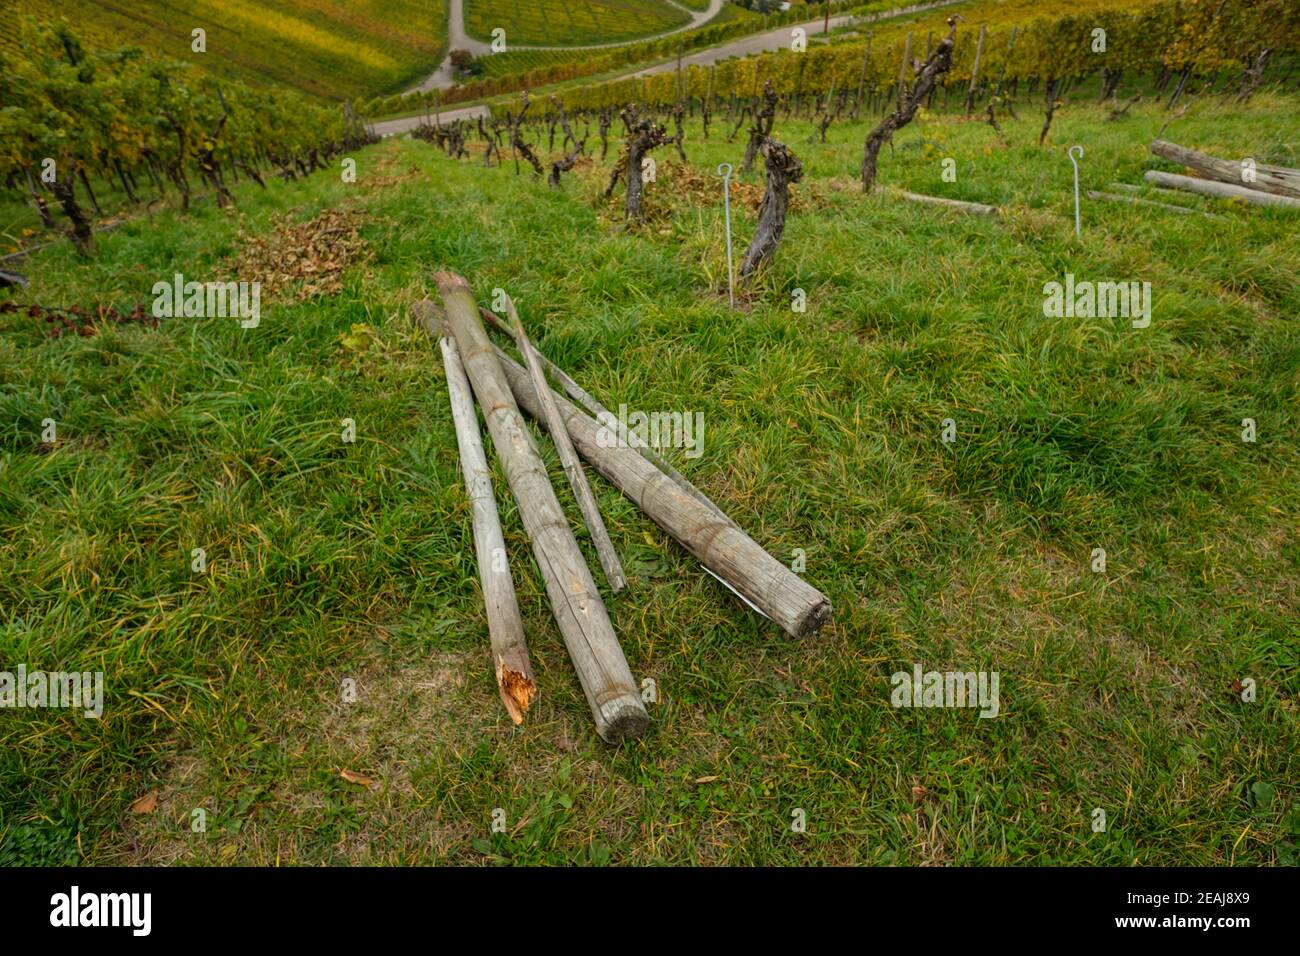 Wooden posts in a vineyard Stock Photo